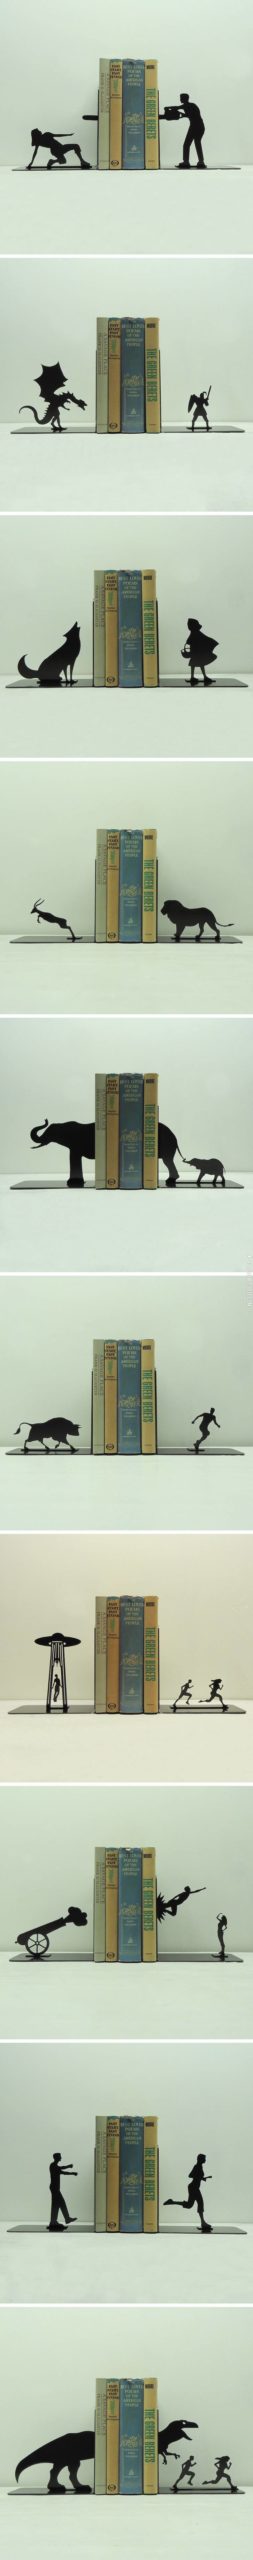 Clever+bookends.